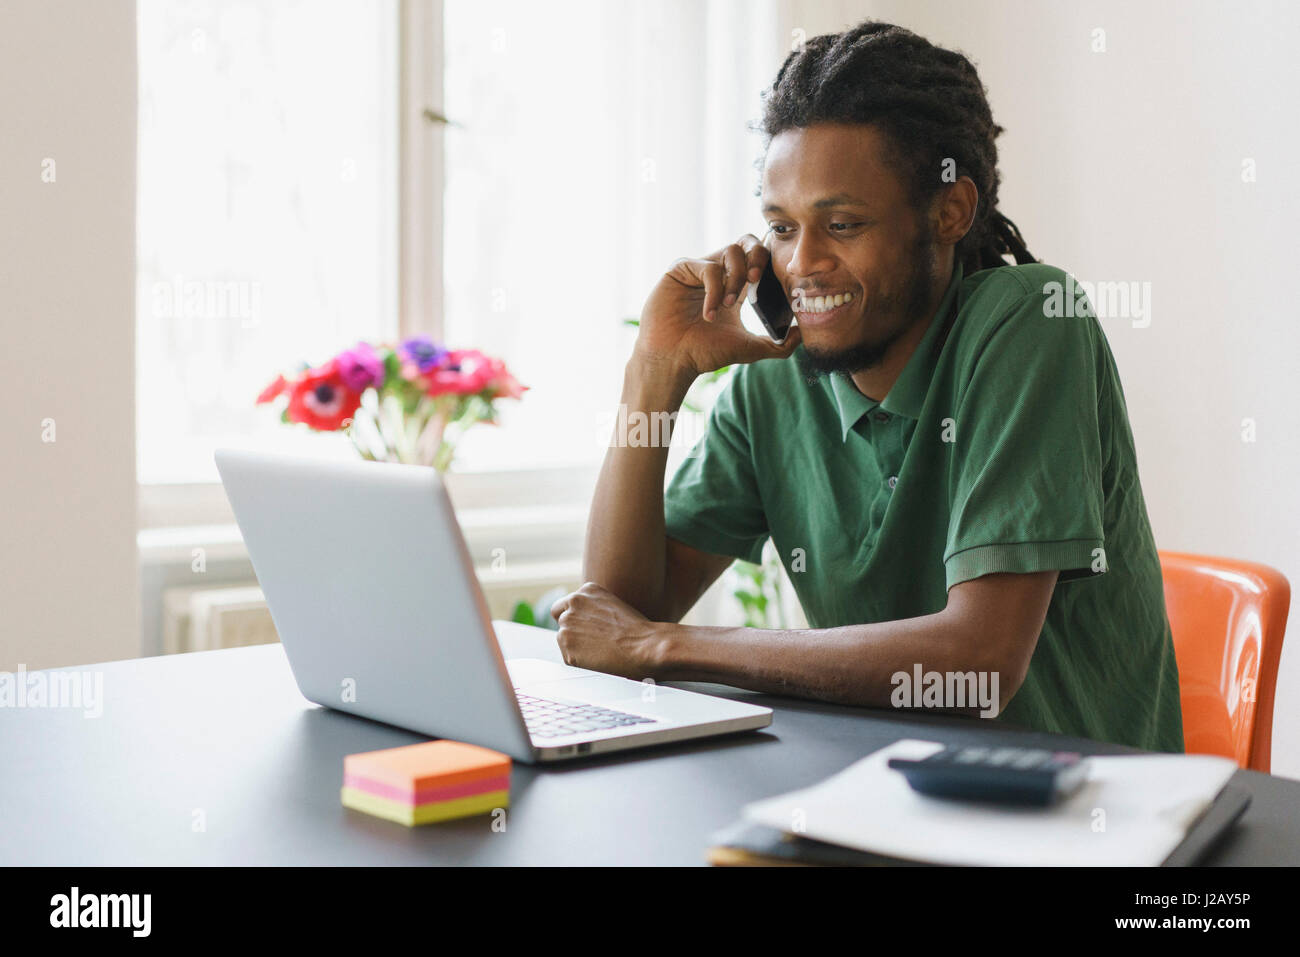 Happy man looking at laptop while using smart phone in house Stock Photo